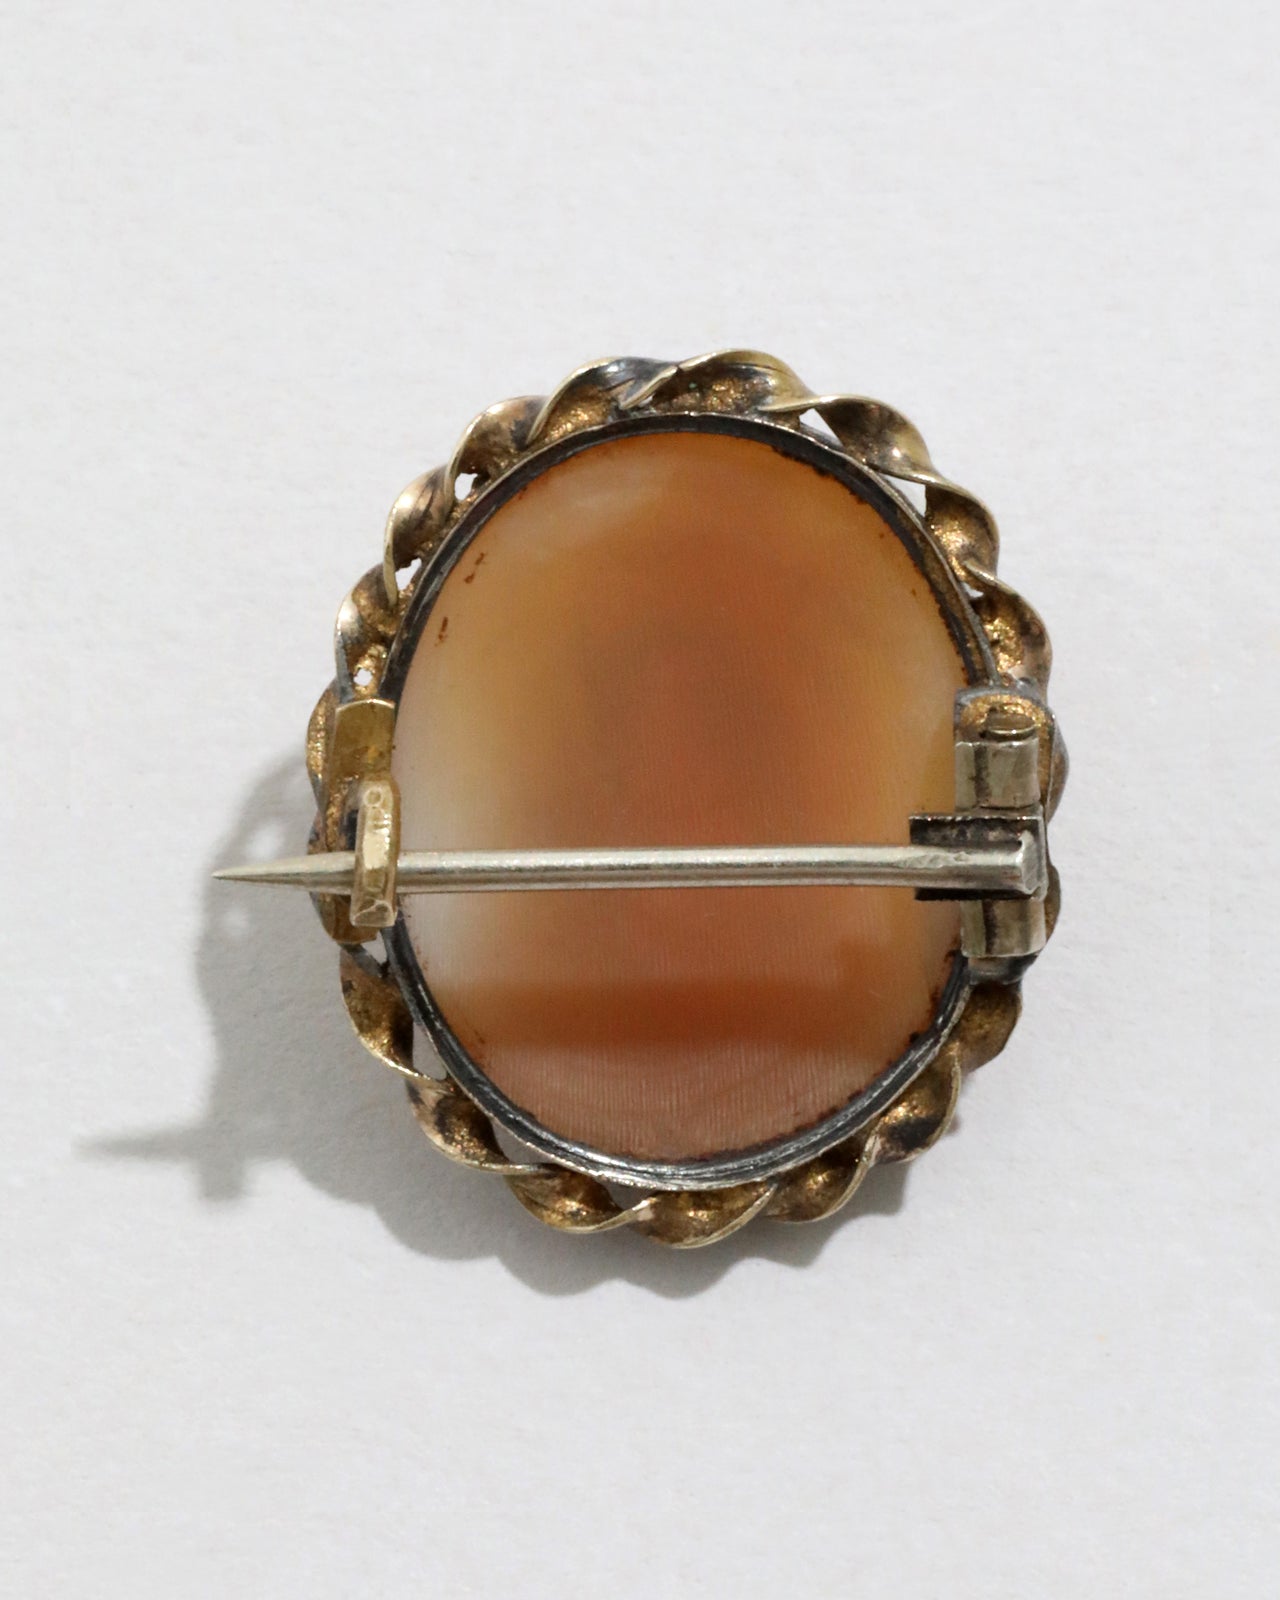 Antique Victorian 14k Gold Fill Hand-Carved Mini Cameo Pin - Photo 2